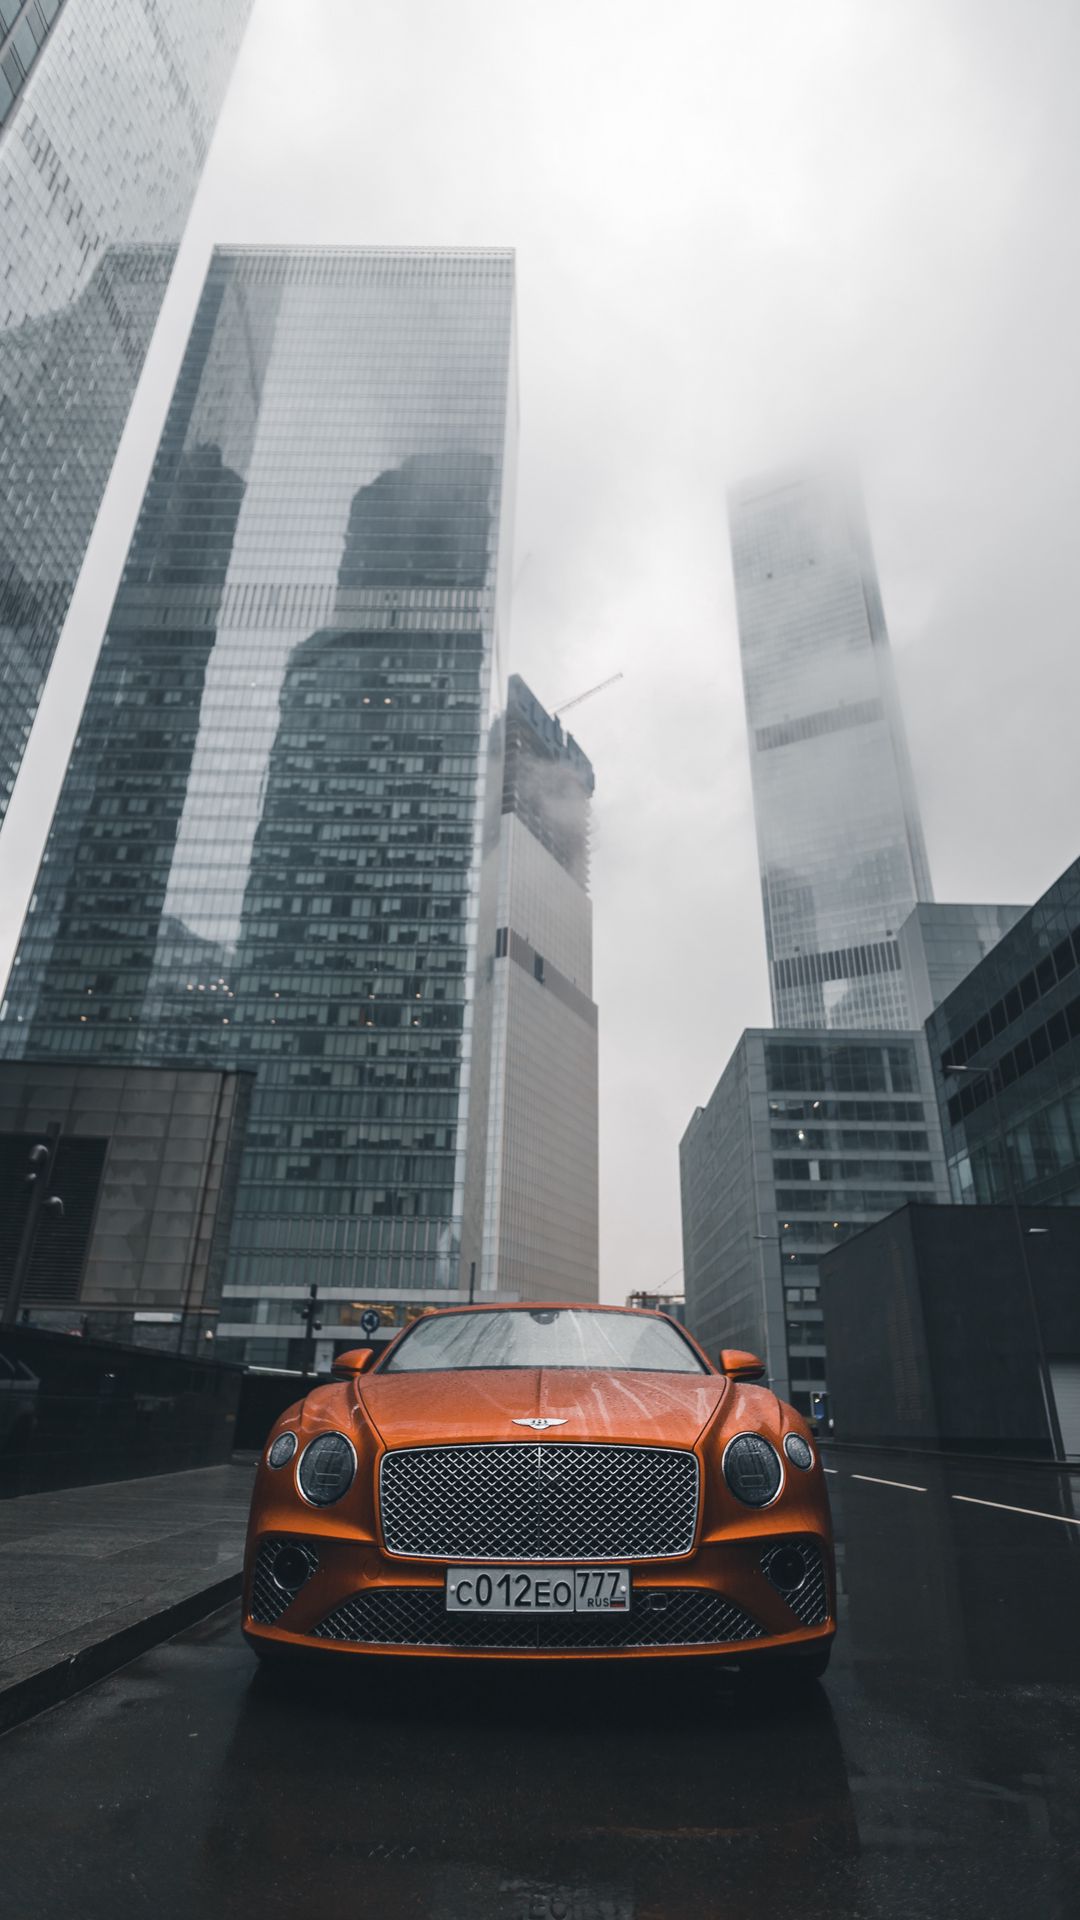 Download wallpaper 1080x1920 bentley continental gt, bentley, car, orange, front view, city, buildings samsung galaxy s s note, sony xperia z, z z z htc one, lenovo vibe HD background